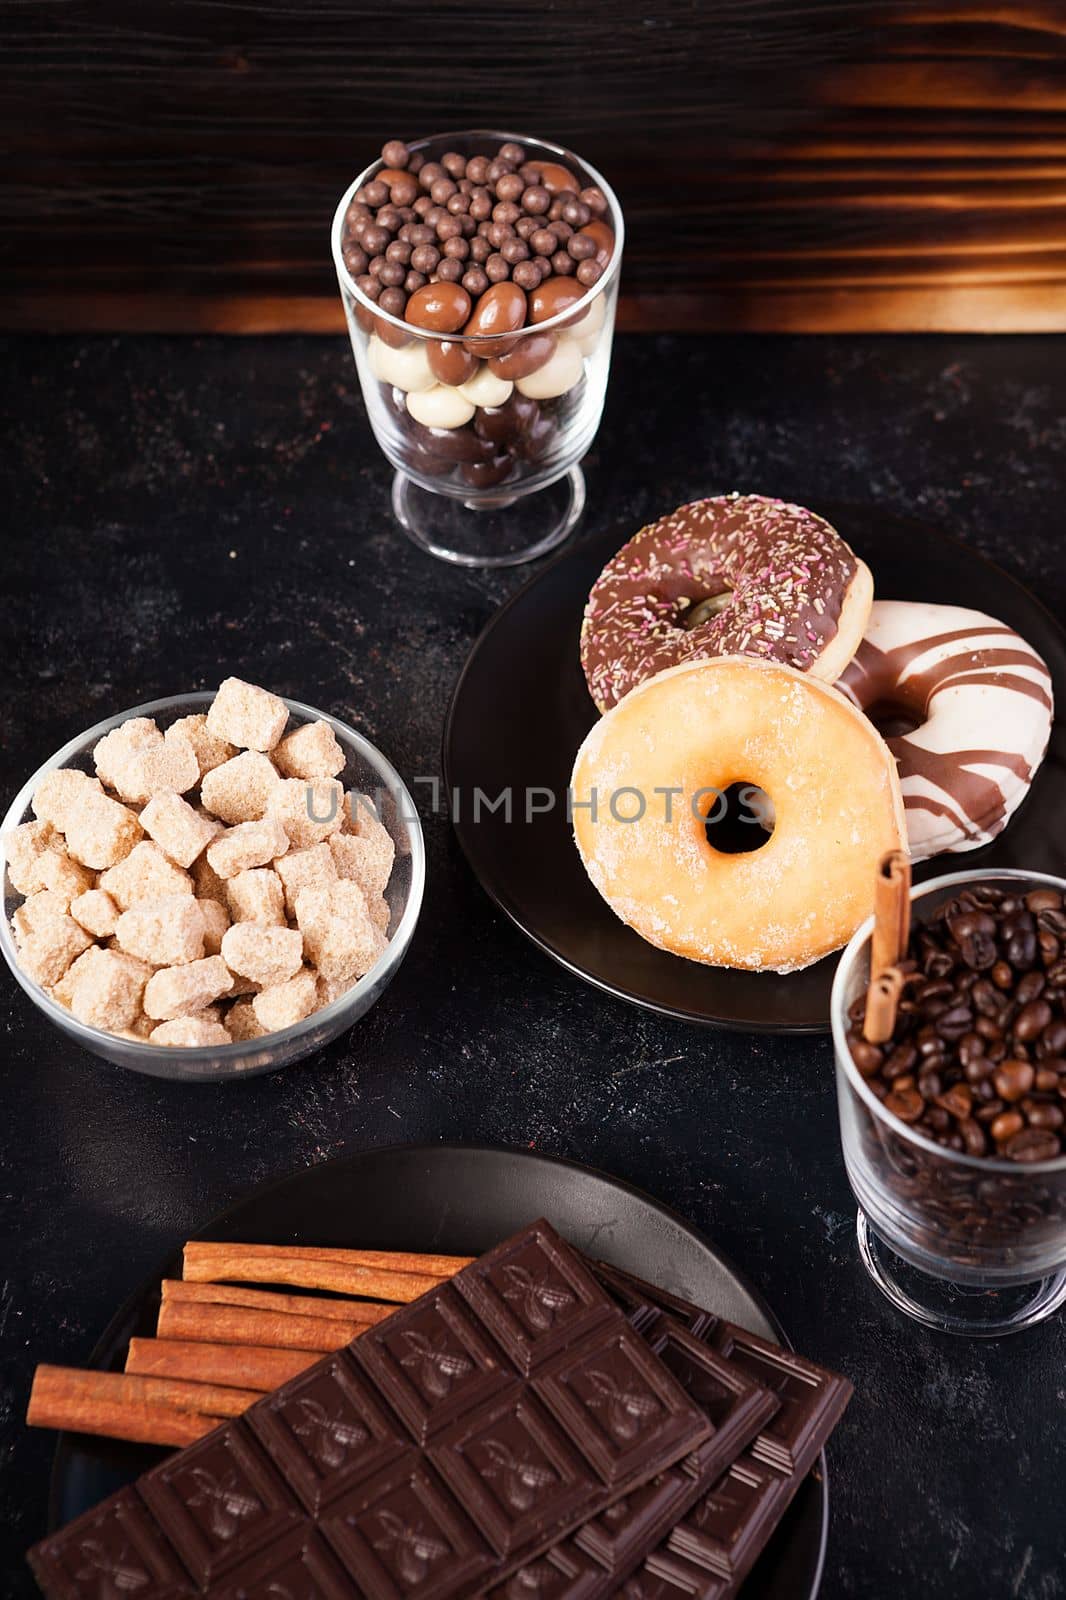 Glass with coffee beans next to chocolate tablets, donuts, brown sugar and other glass with peanuts in chocolate on dark wooden background